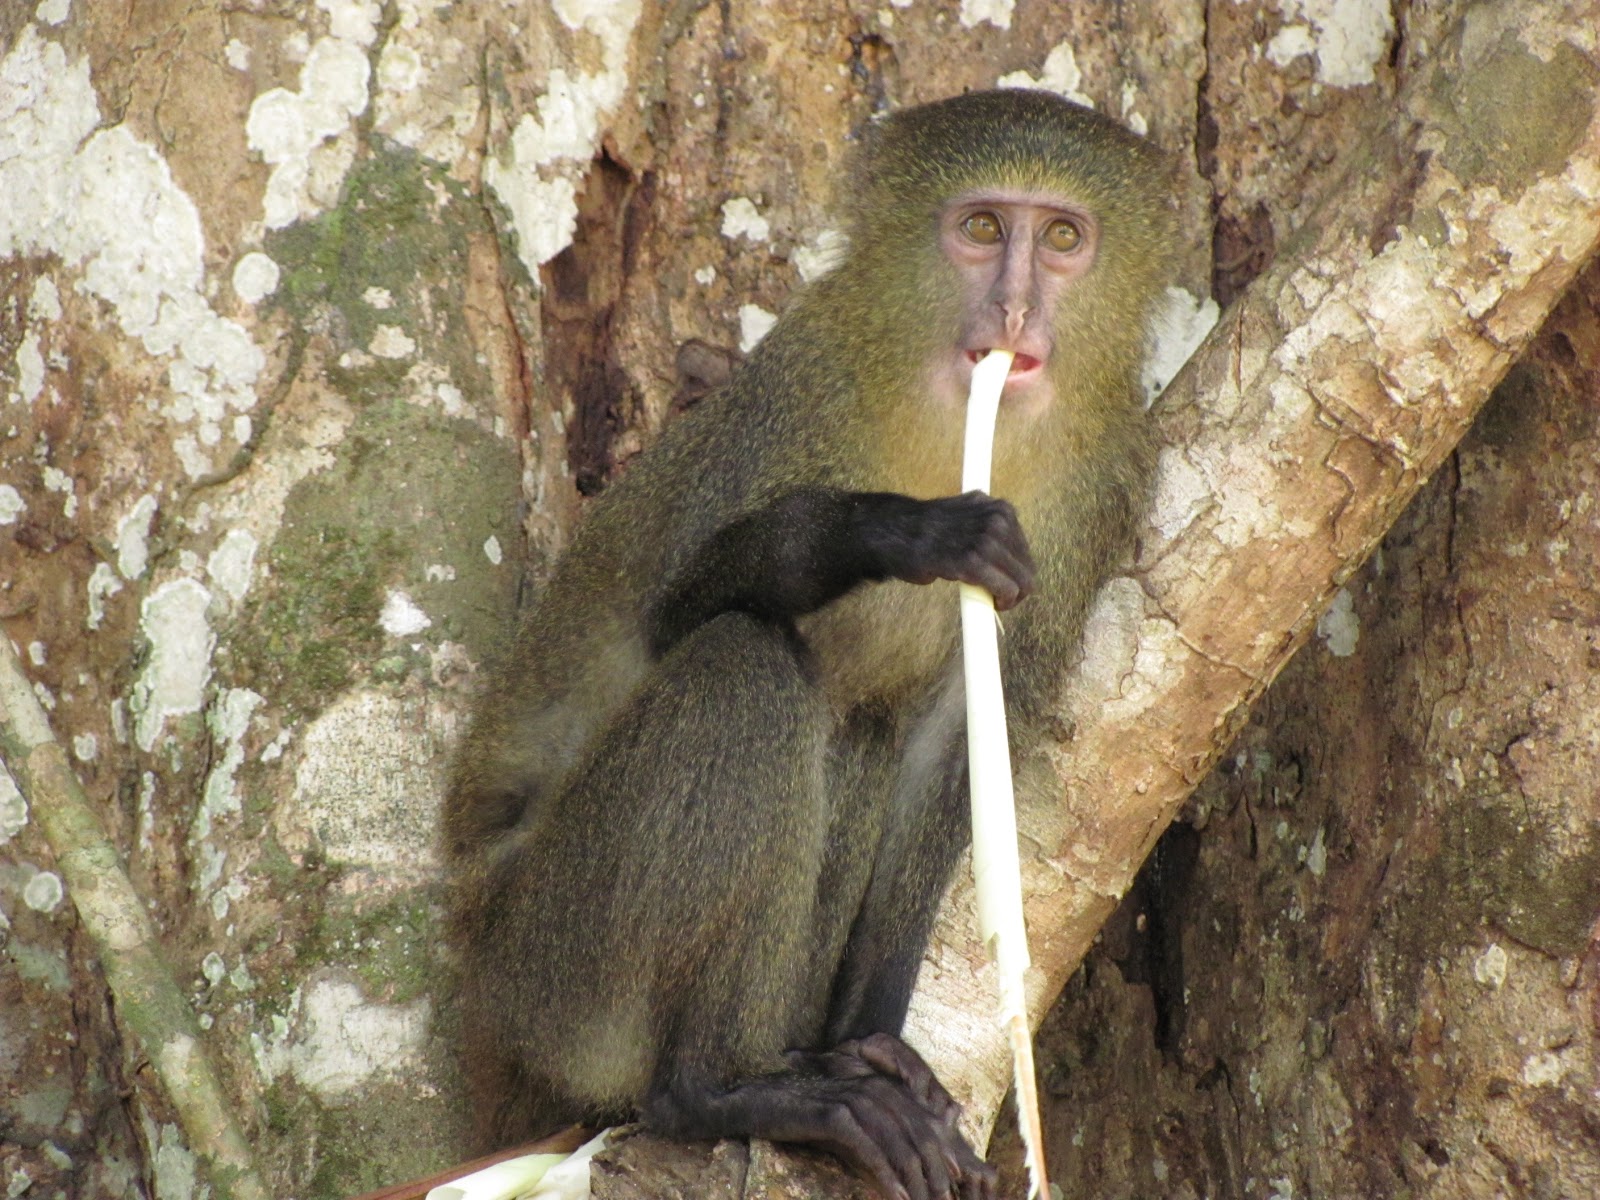 ... of the lesula, the new species of monkey, courtesy of Kate Detwiler